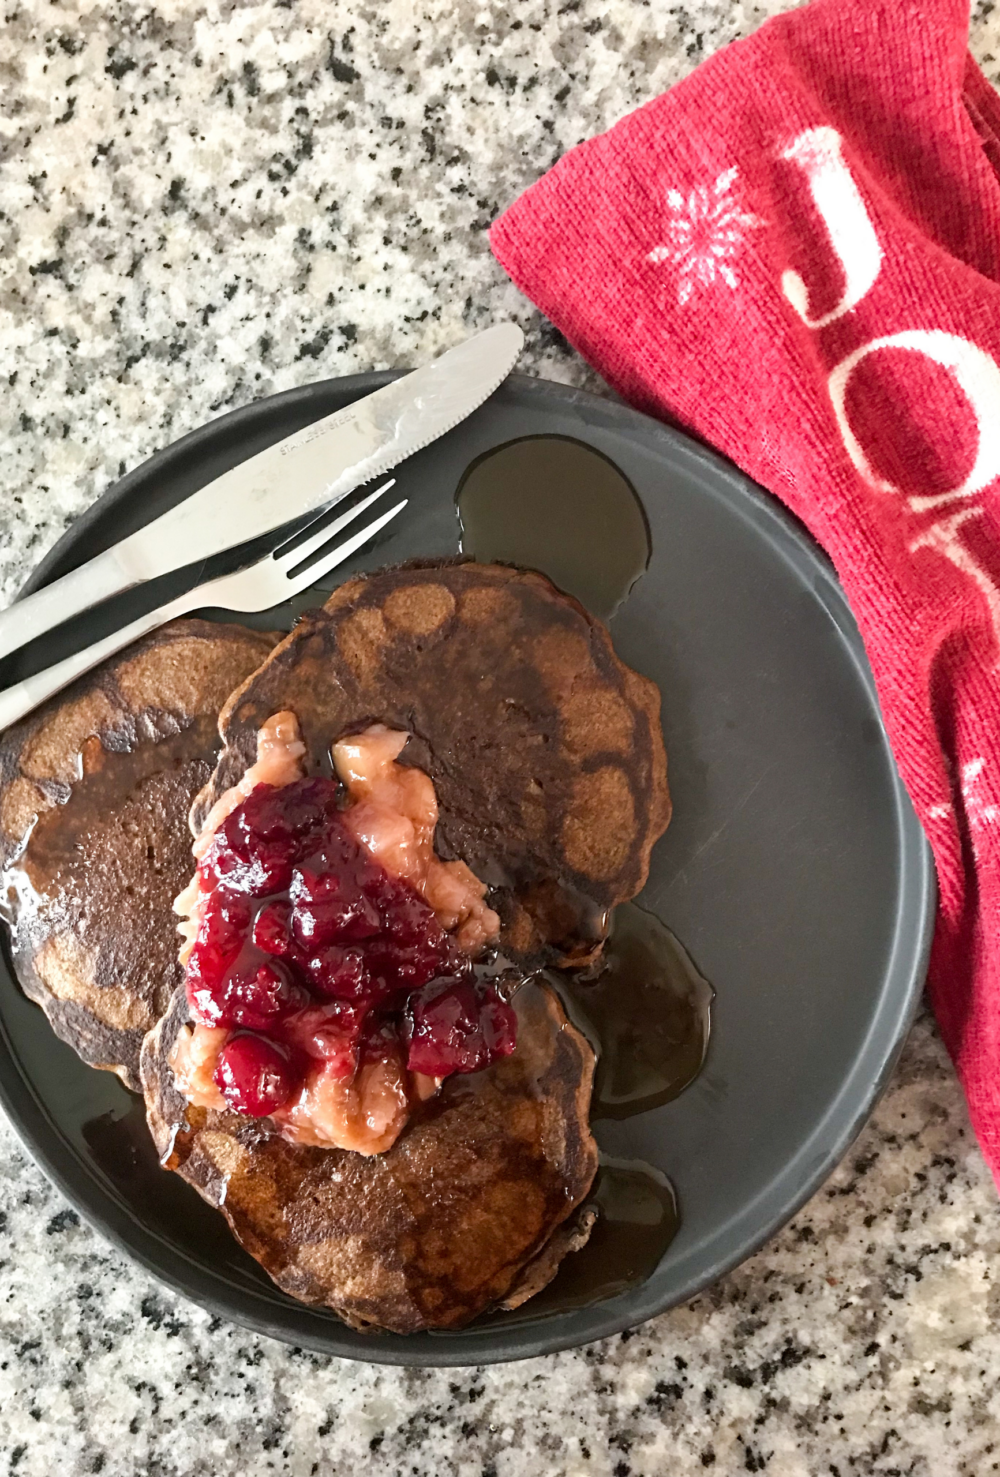 Zoomed out overhead shot of gingerbread sourdough pancakes on a black plate. The pancakes are topped with applesauce, cranberry sauce, and maple syrup. Beside the plate is a red tea towel with the word "jolly" stamped on it.